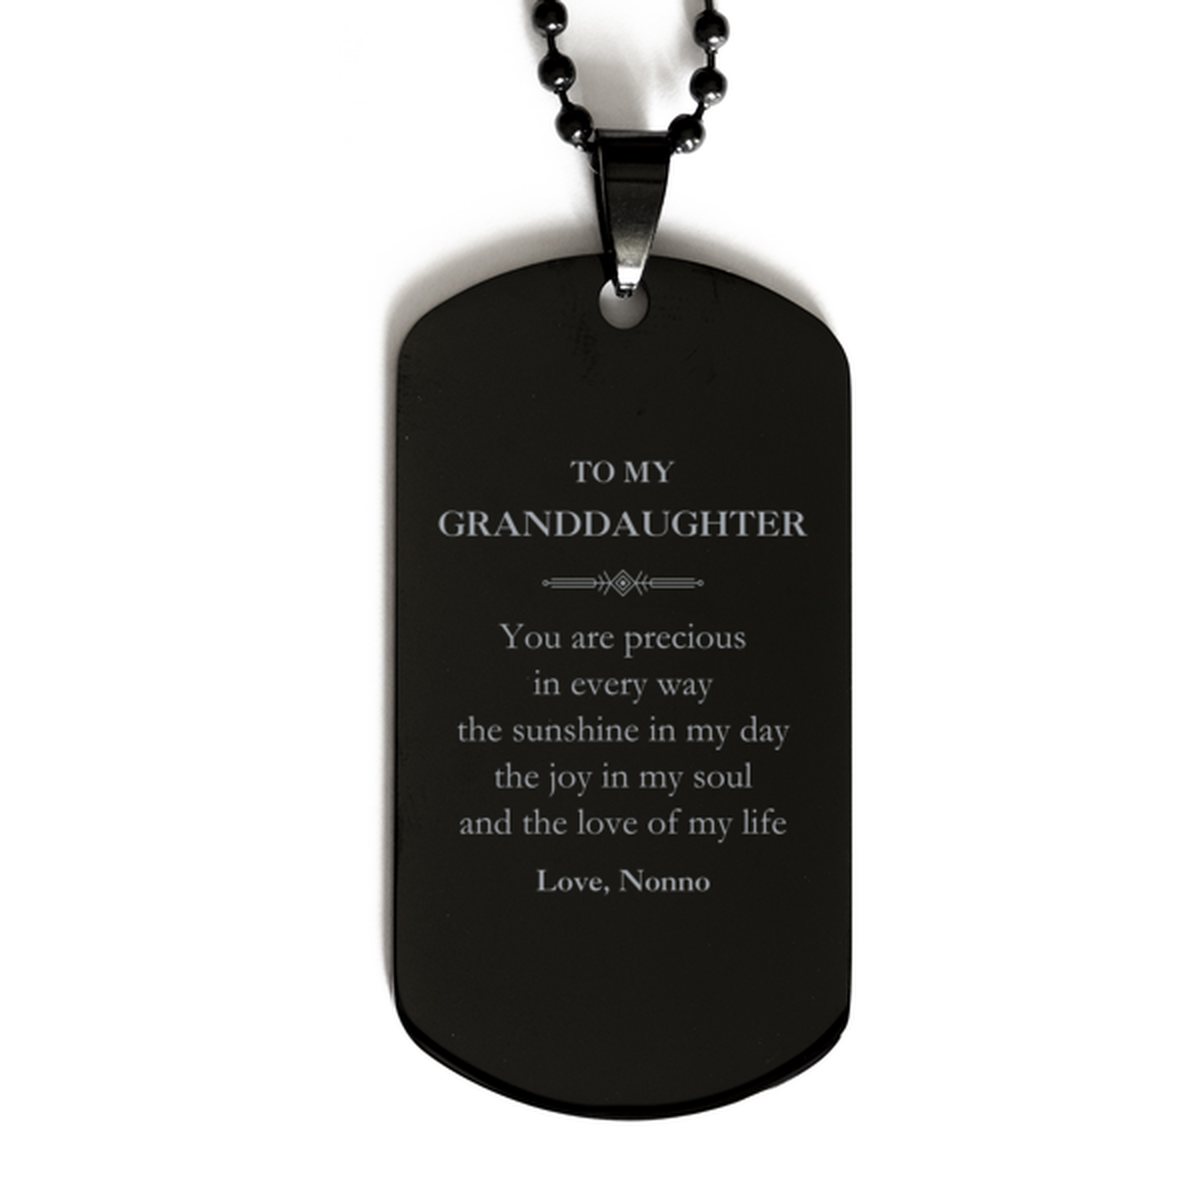 Graduation Gifts for Granddaughter Black Dog Tag Present from Nonno, Christmas Granddaughter Birthday Gifts Granddaughter You are precious in every way the sunshine in my day. Love, Nonno